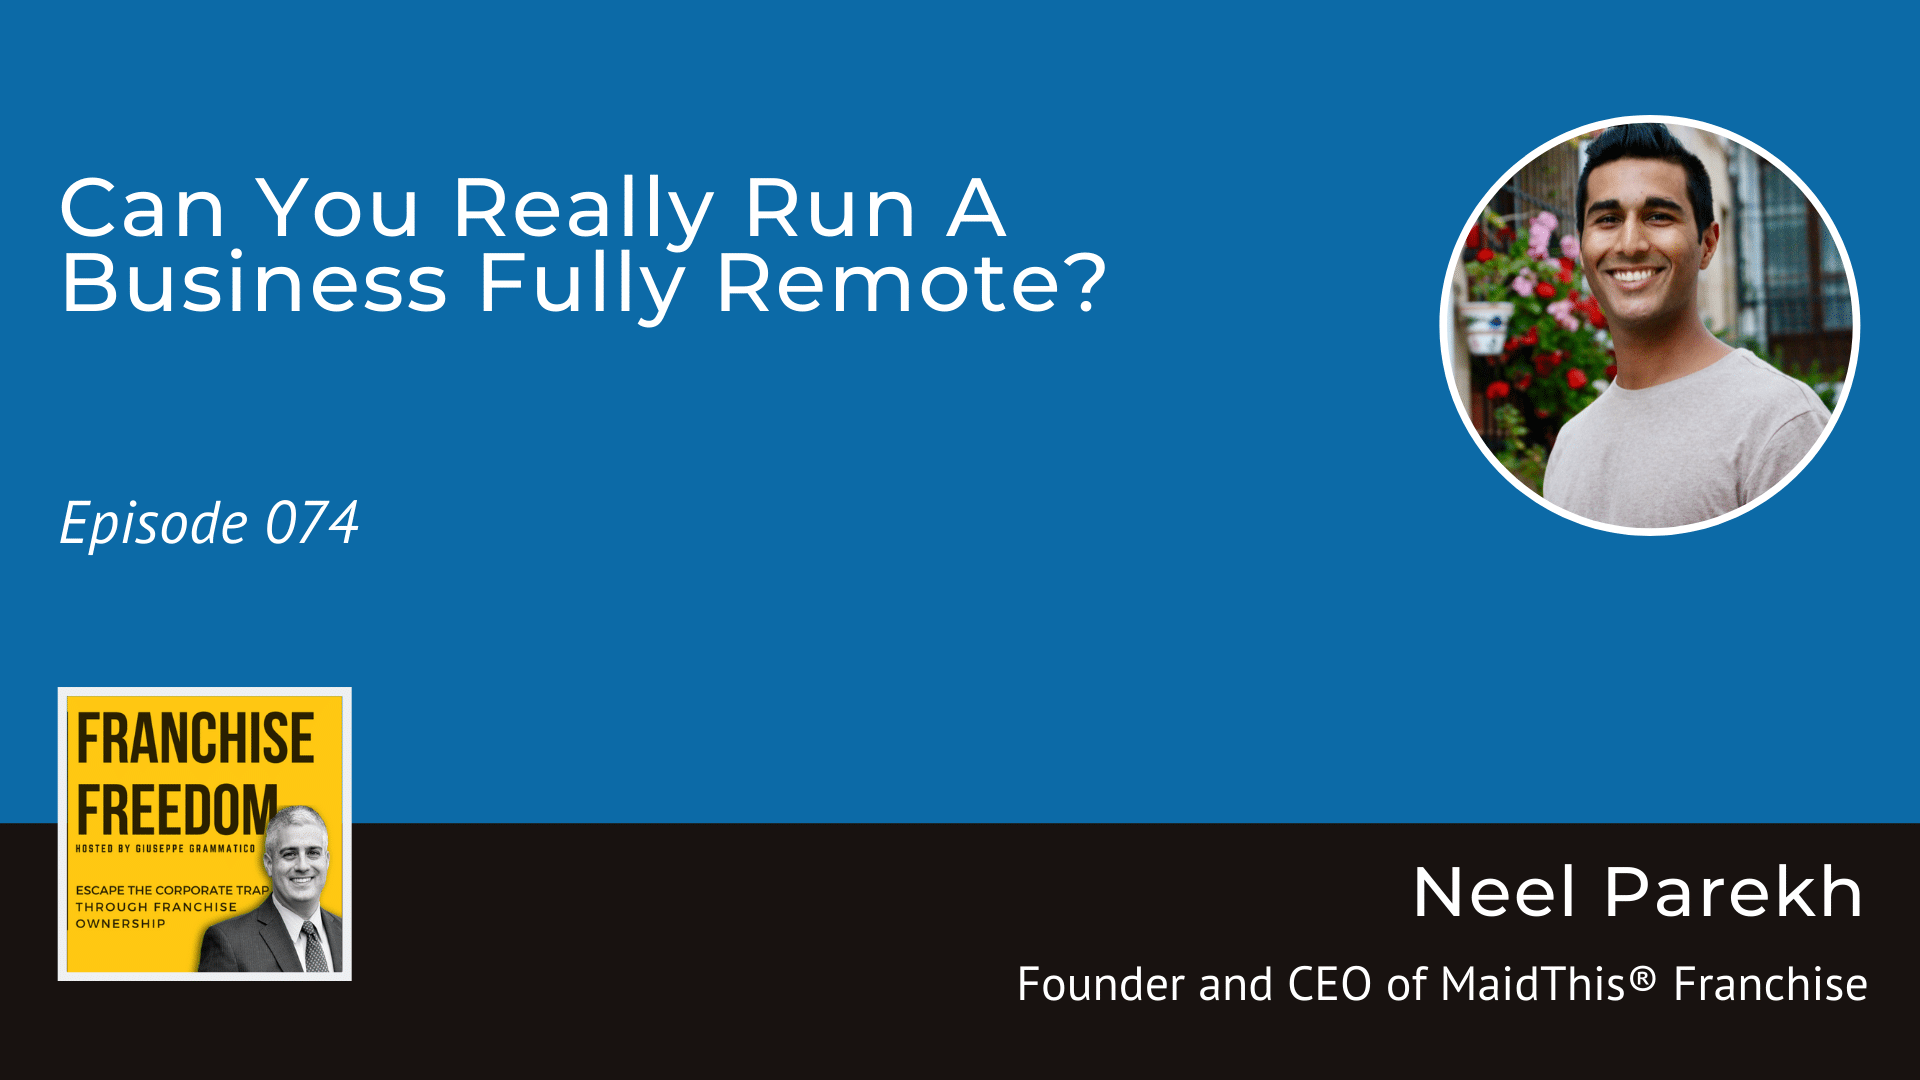 Can You Really Run A Business Fully Remote?